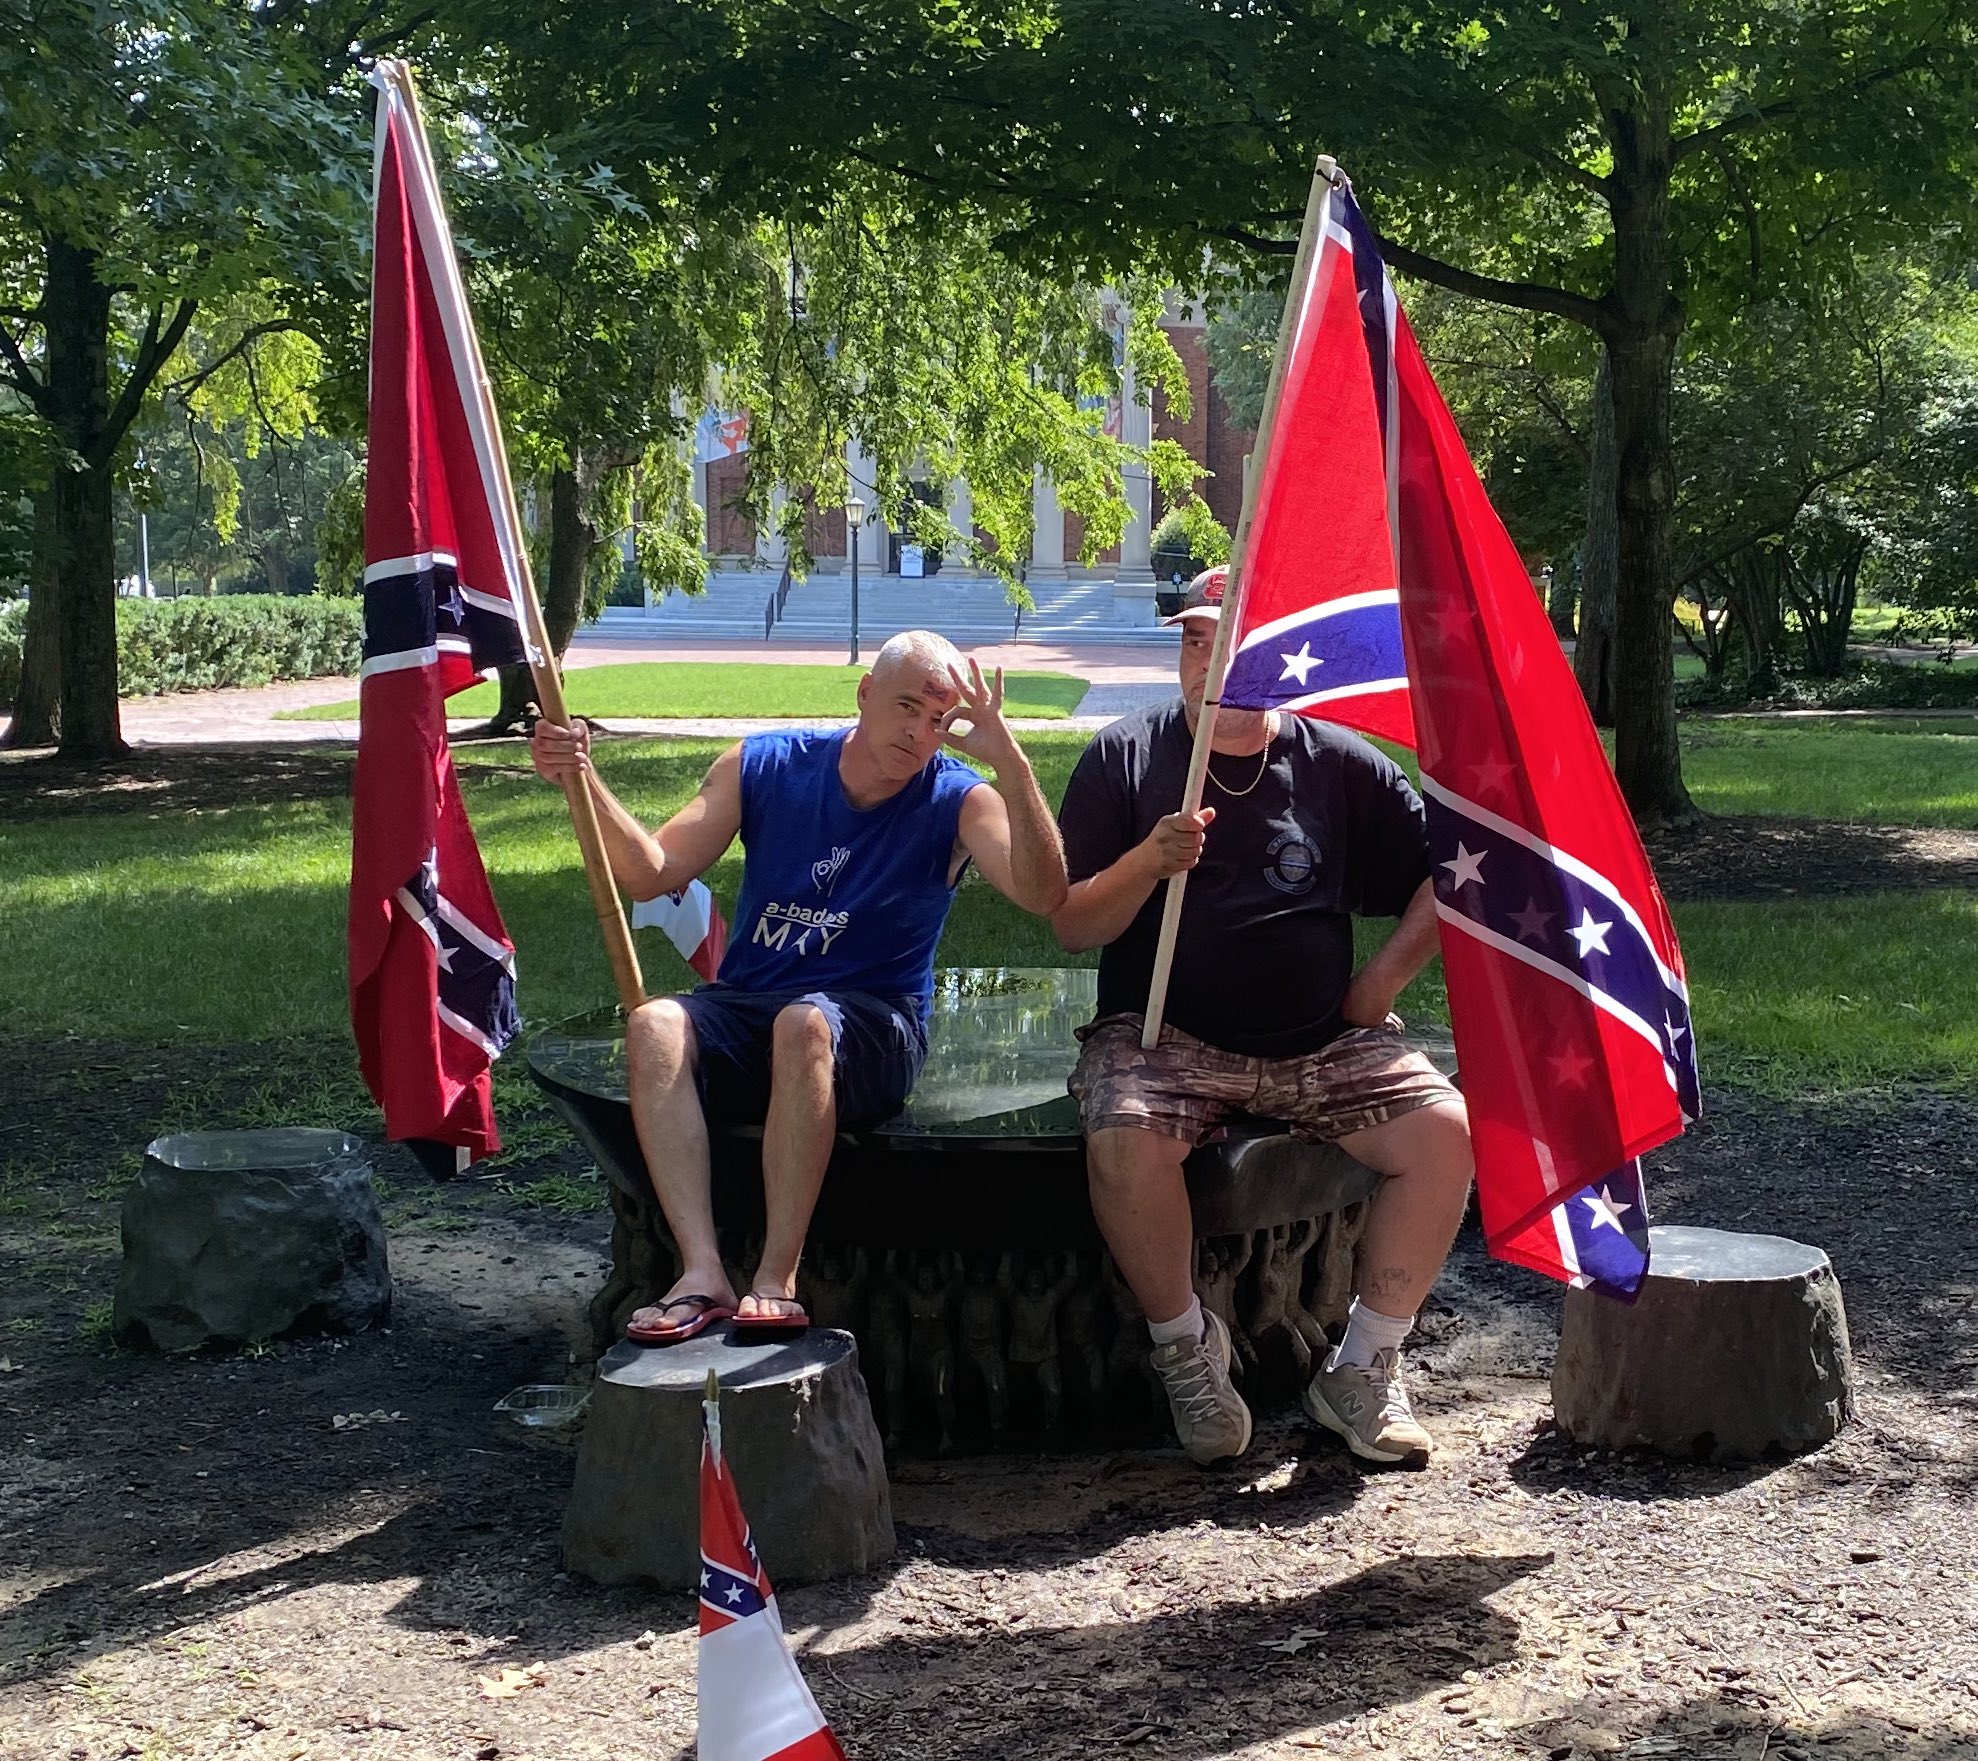 Neo-Confederates Thomas May and Joey Wardwell sit on top of the Unsung Founders Memorial, a monument honoring the enslaved and free Black people who built the University of North Carolina. May flashes a “white power” hand signal. Chapel Hill, NC, July 10, 2021.